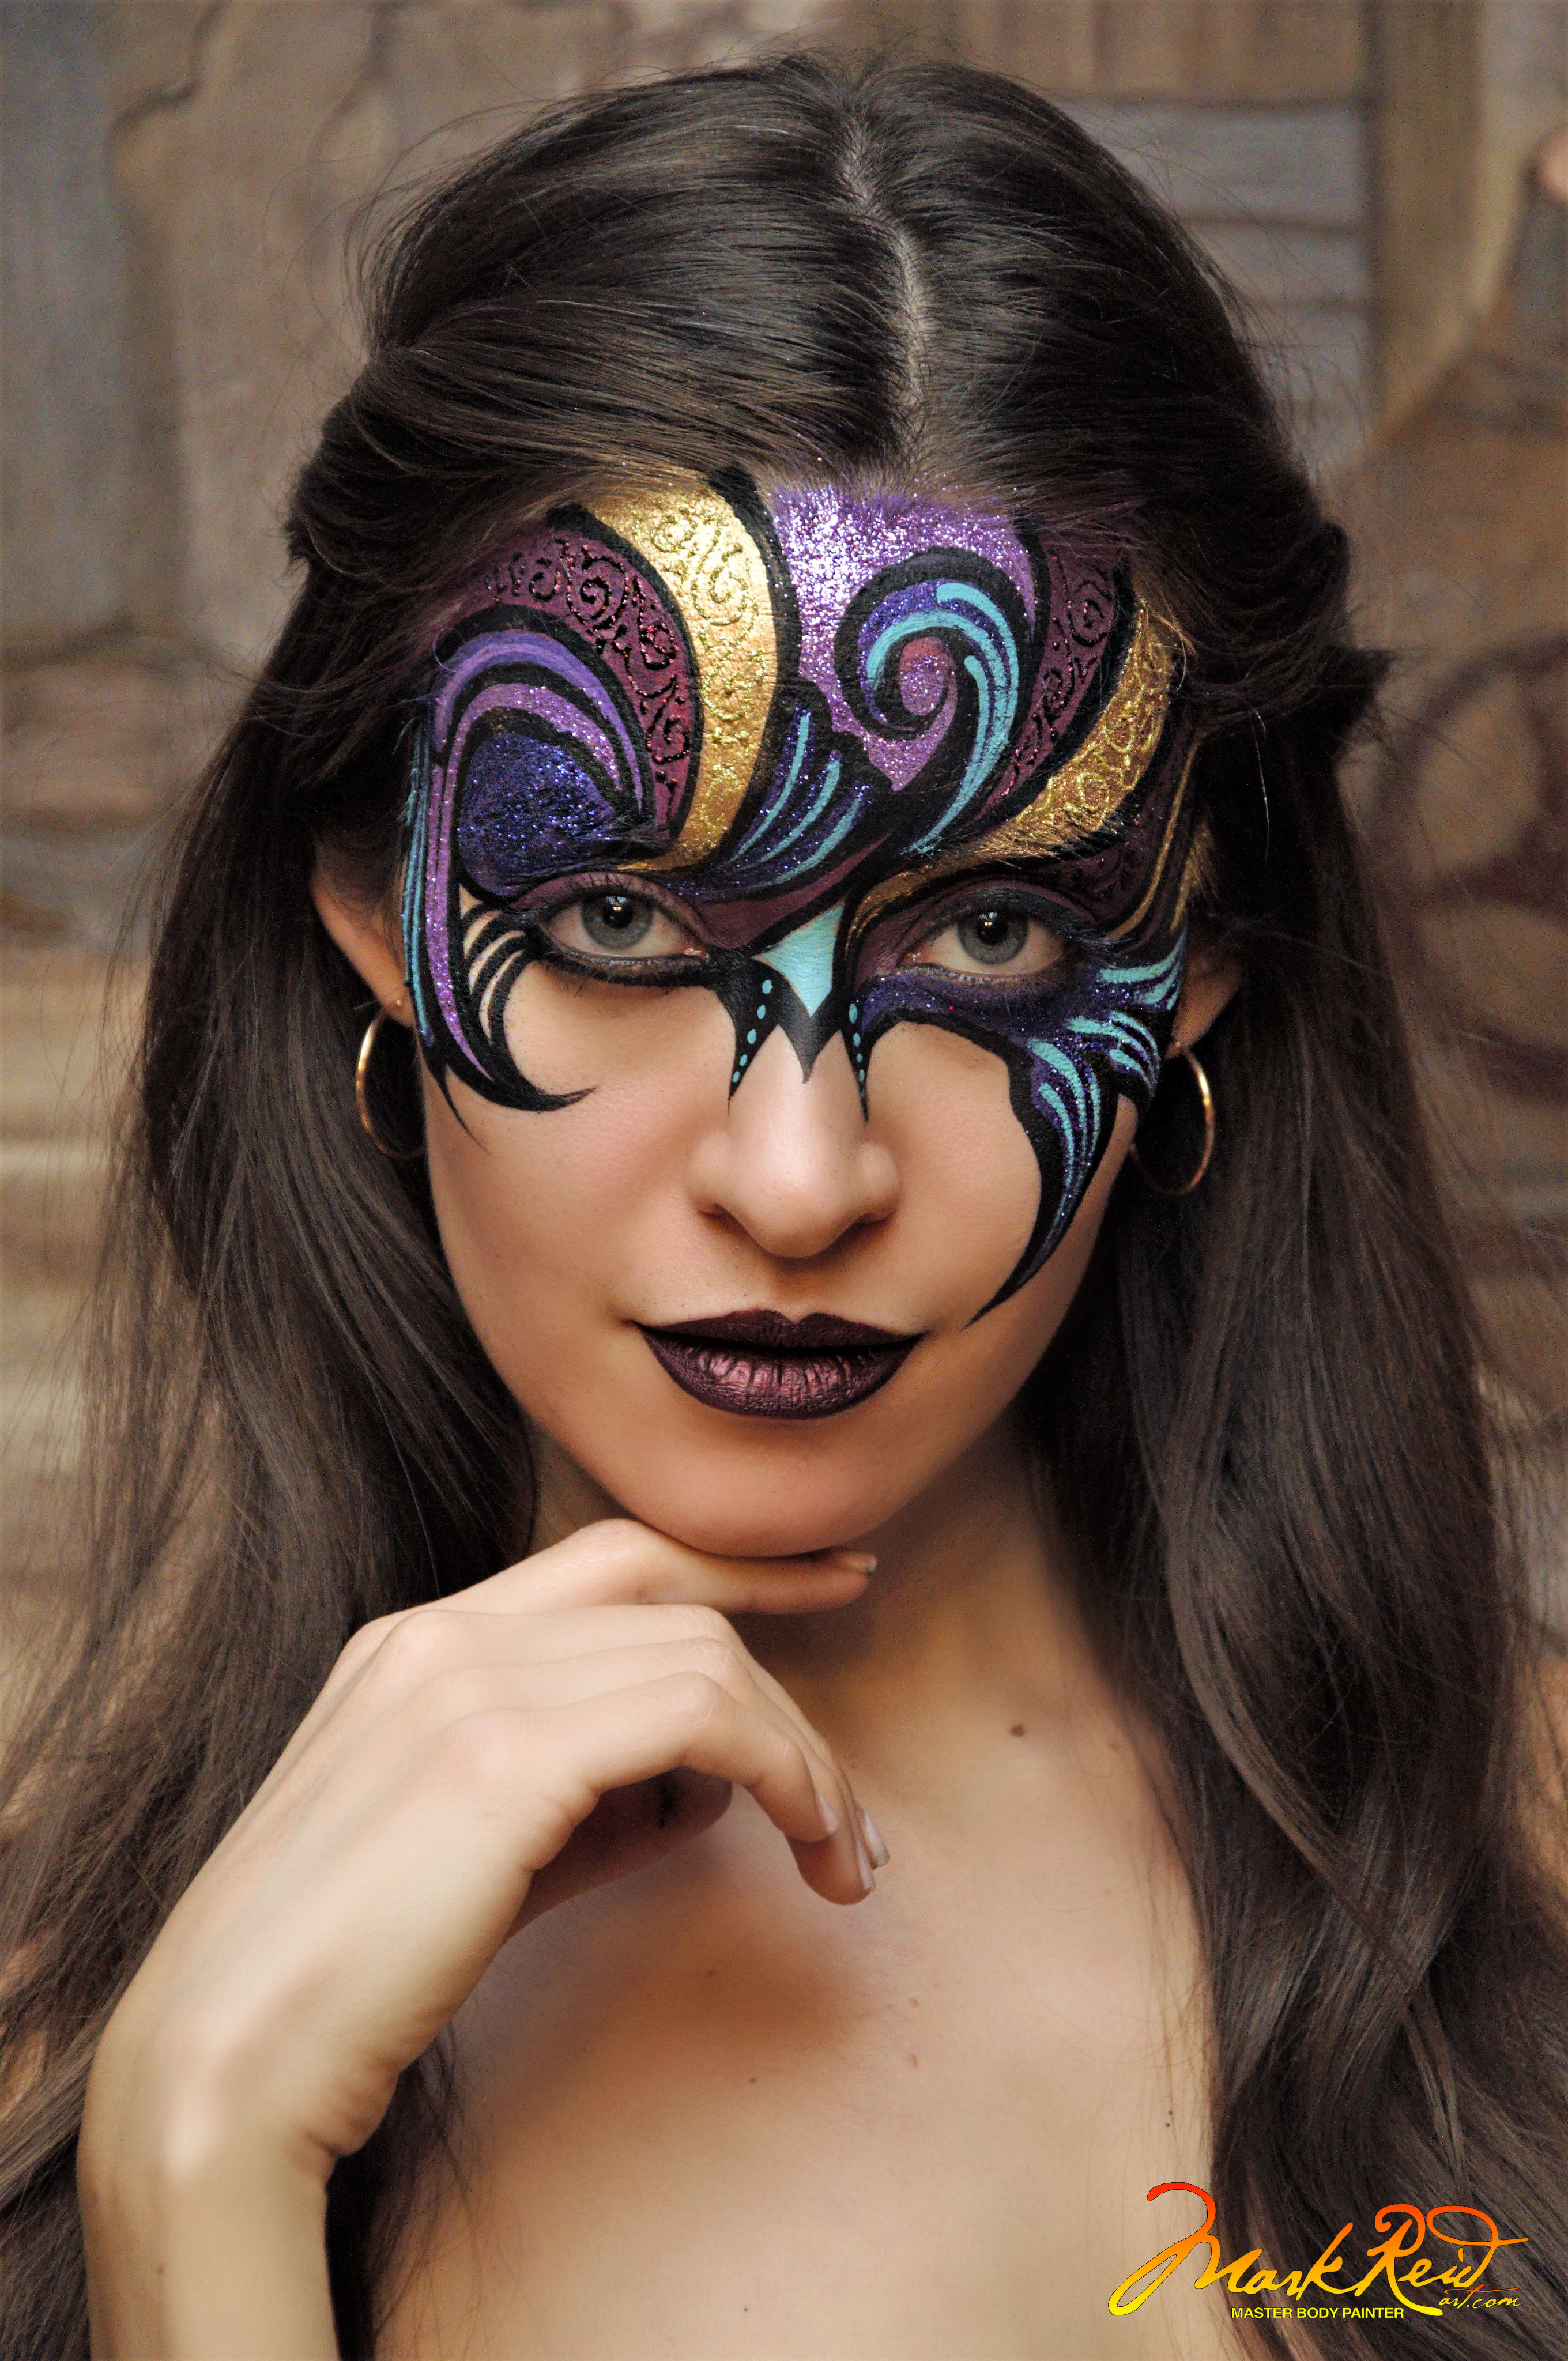 Brunette with long flowing hair and a painted on mask around her eyes and on her forehead. Very detailed mask in gold and purple mostly with lots of swirling lines